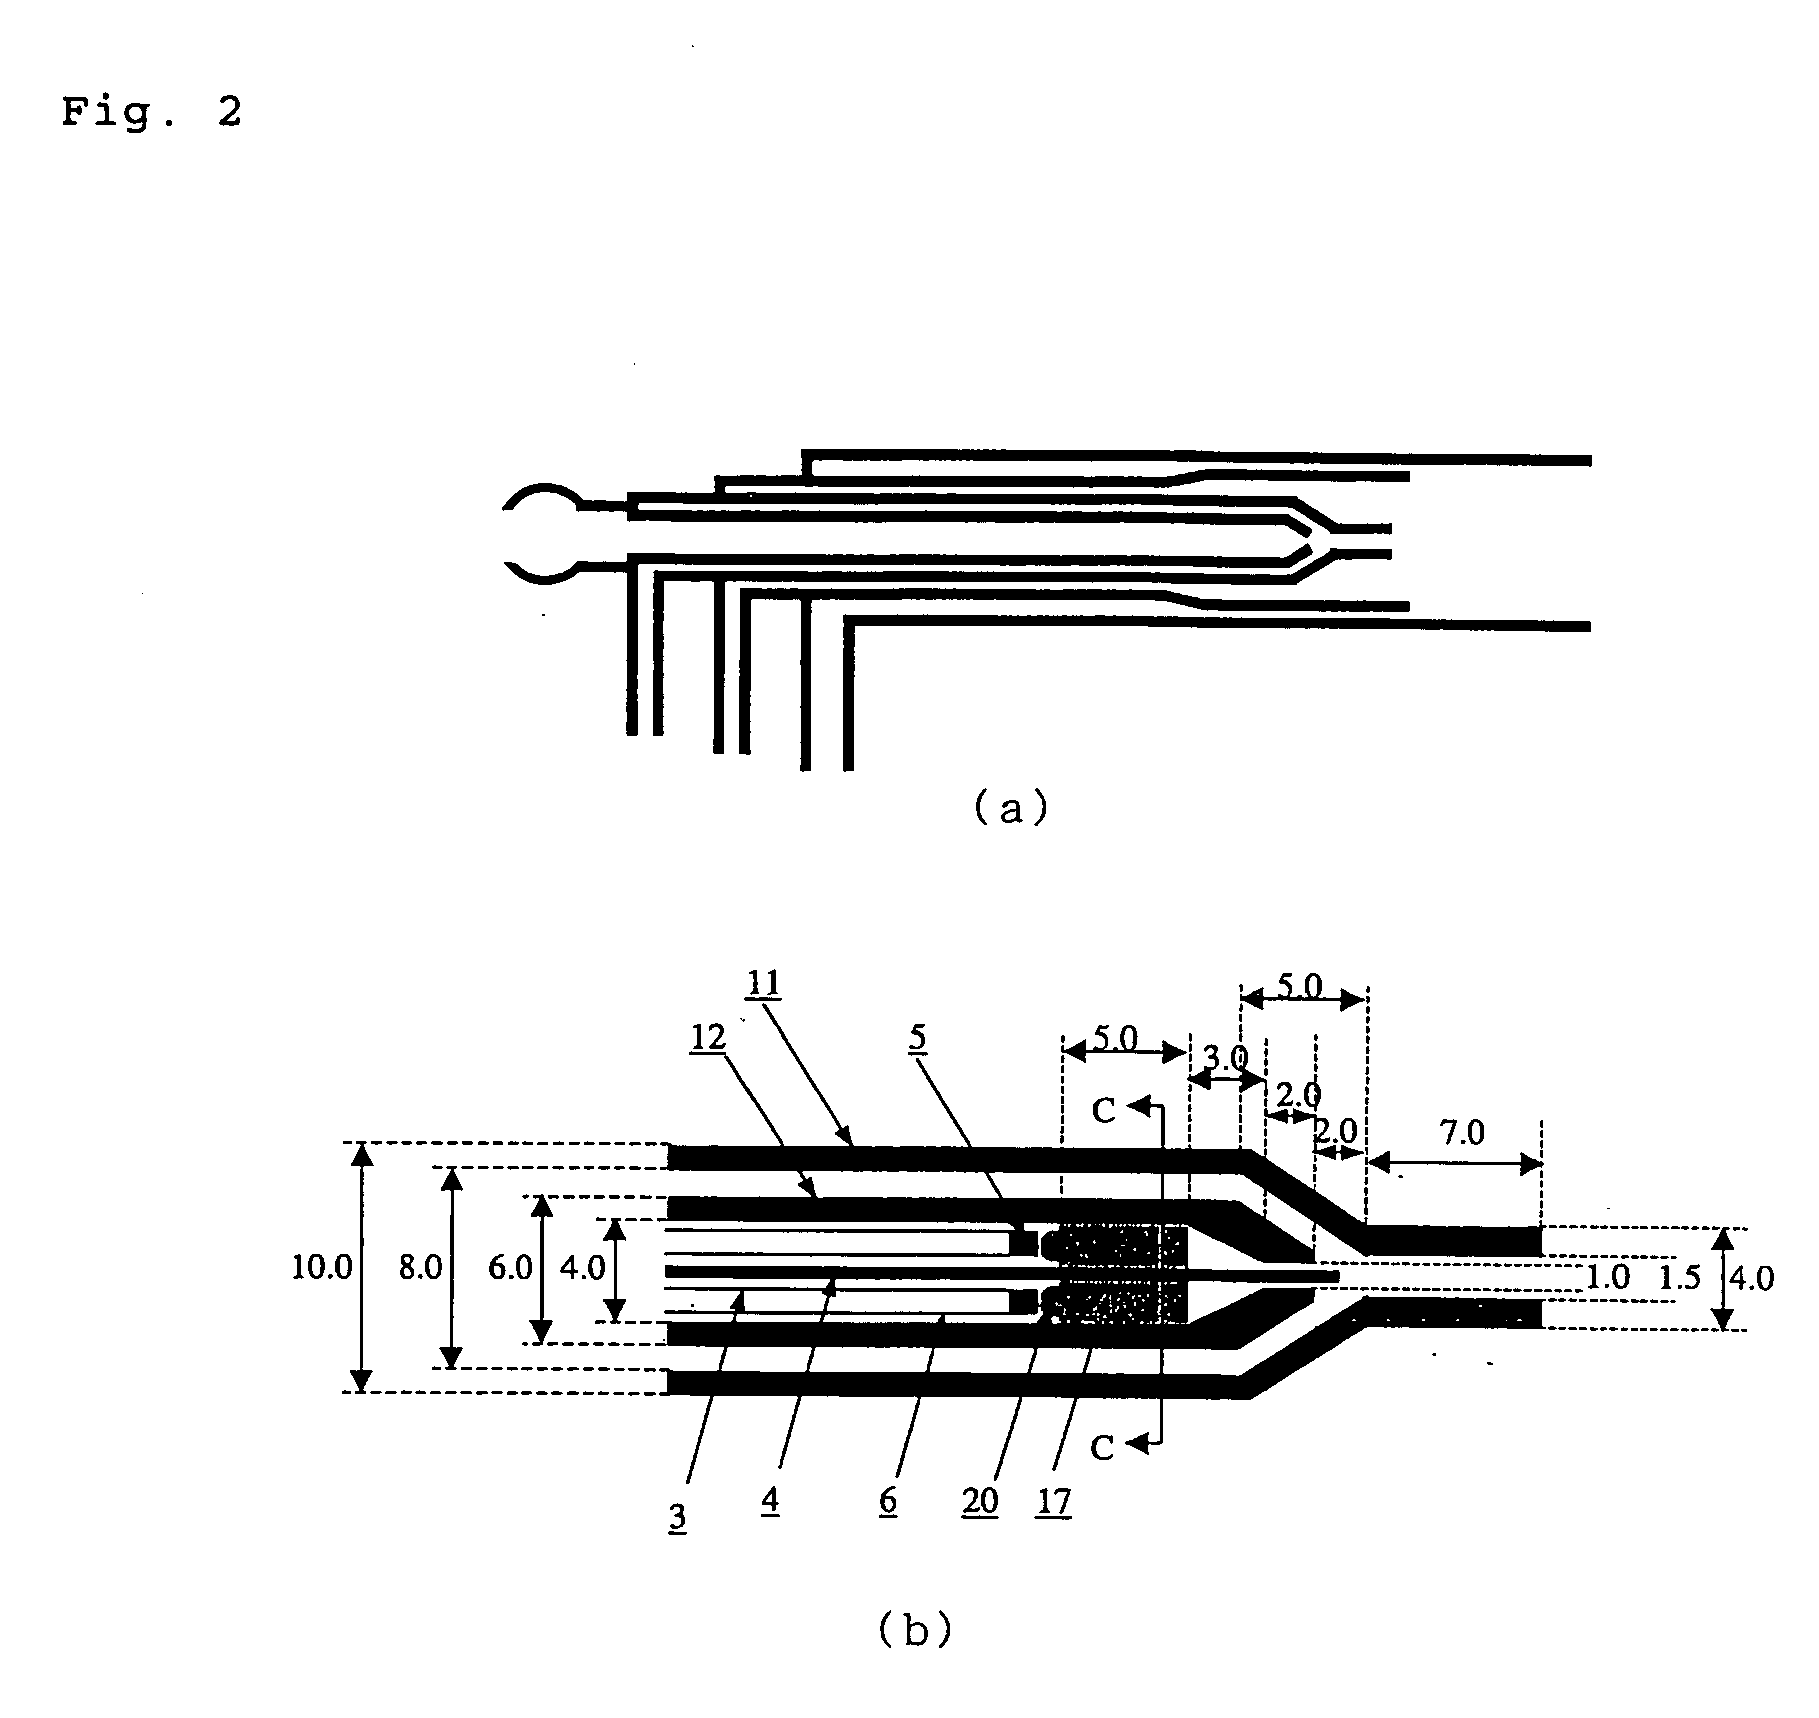 Inductively-coupled plasma torch